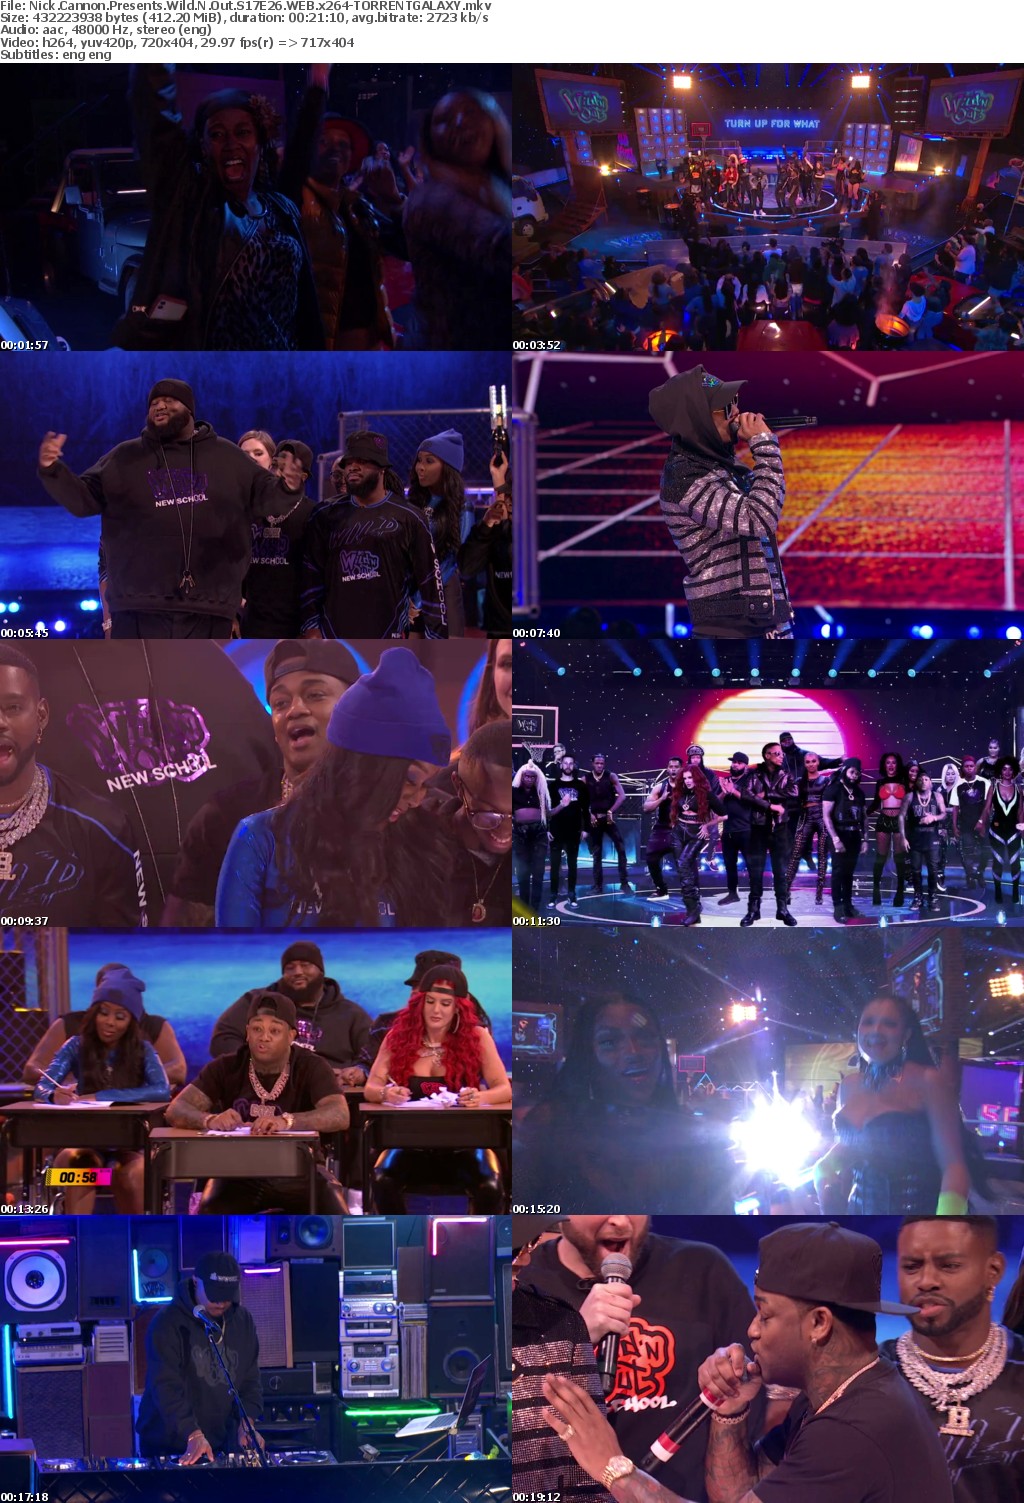 Nick Cannon Presents Wild N Out S17E26 WEB x264-GALAXY